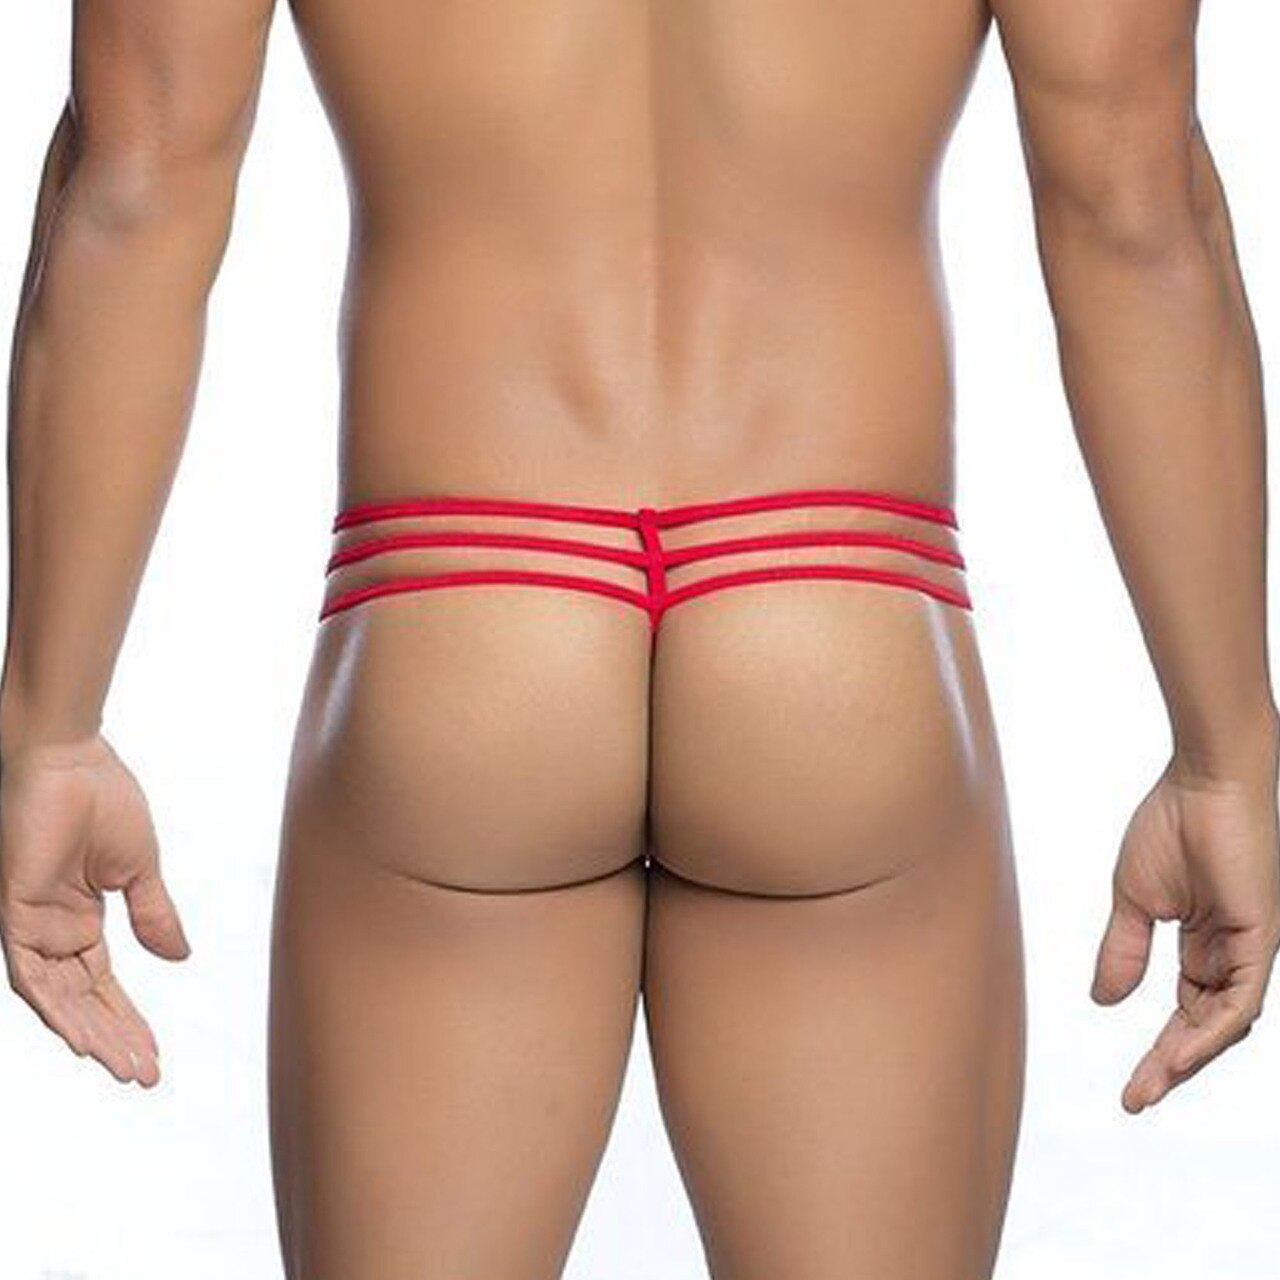 Mens Male Basics Lace G string Thong with Triple Straps Red